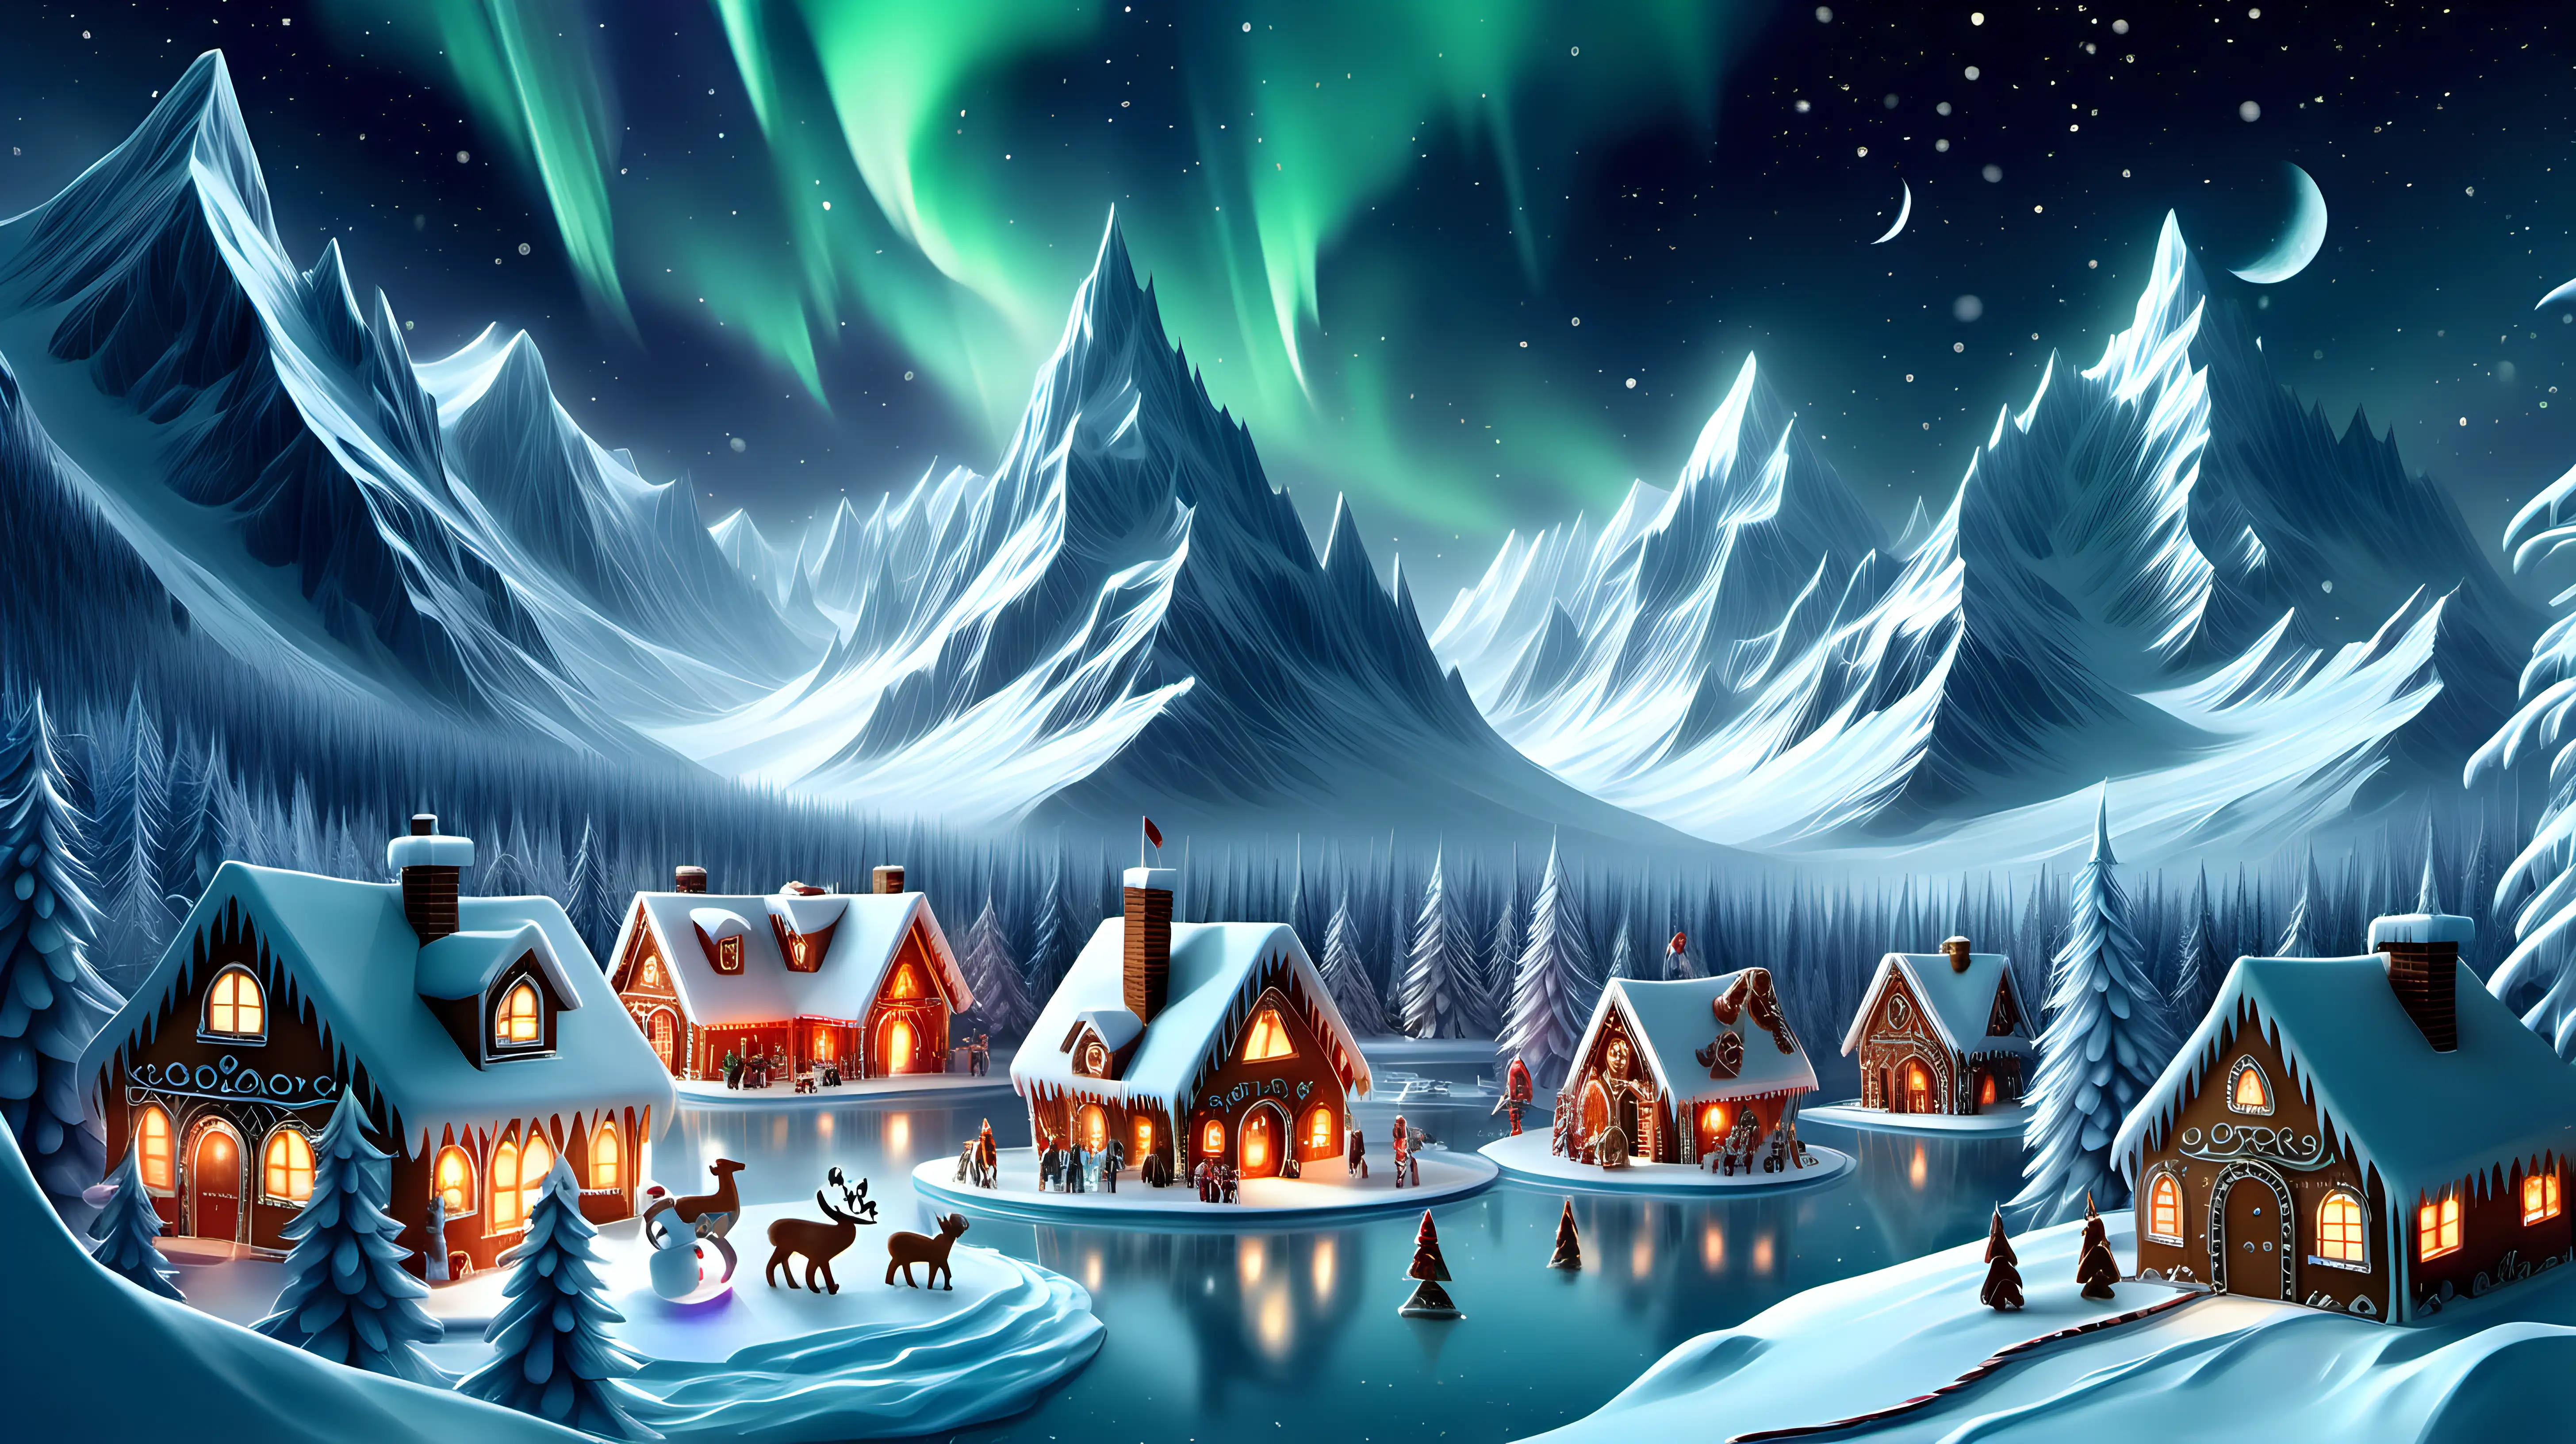 a realm of cold winter, with glowing mountain glaciers, night time sky, aurora, Santa's workshop, gingerbread, snowman, Christmas trees